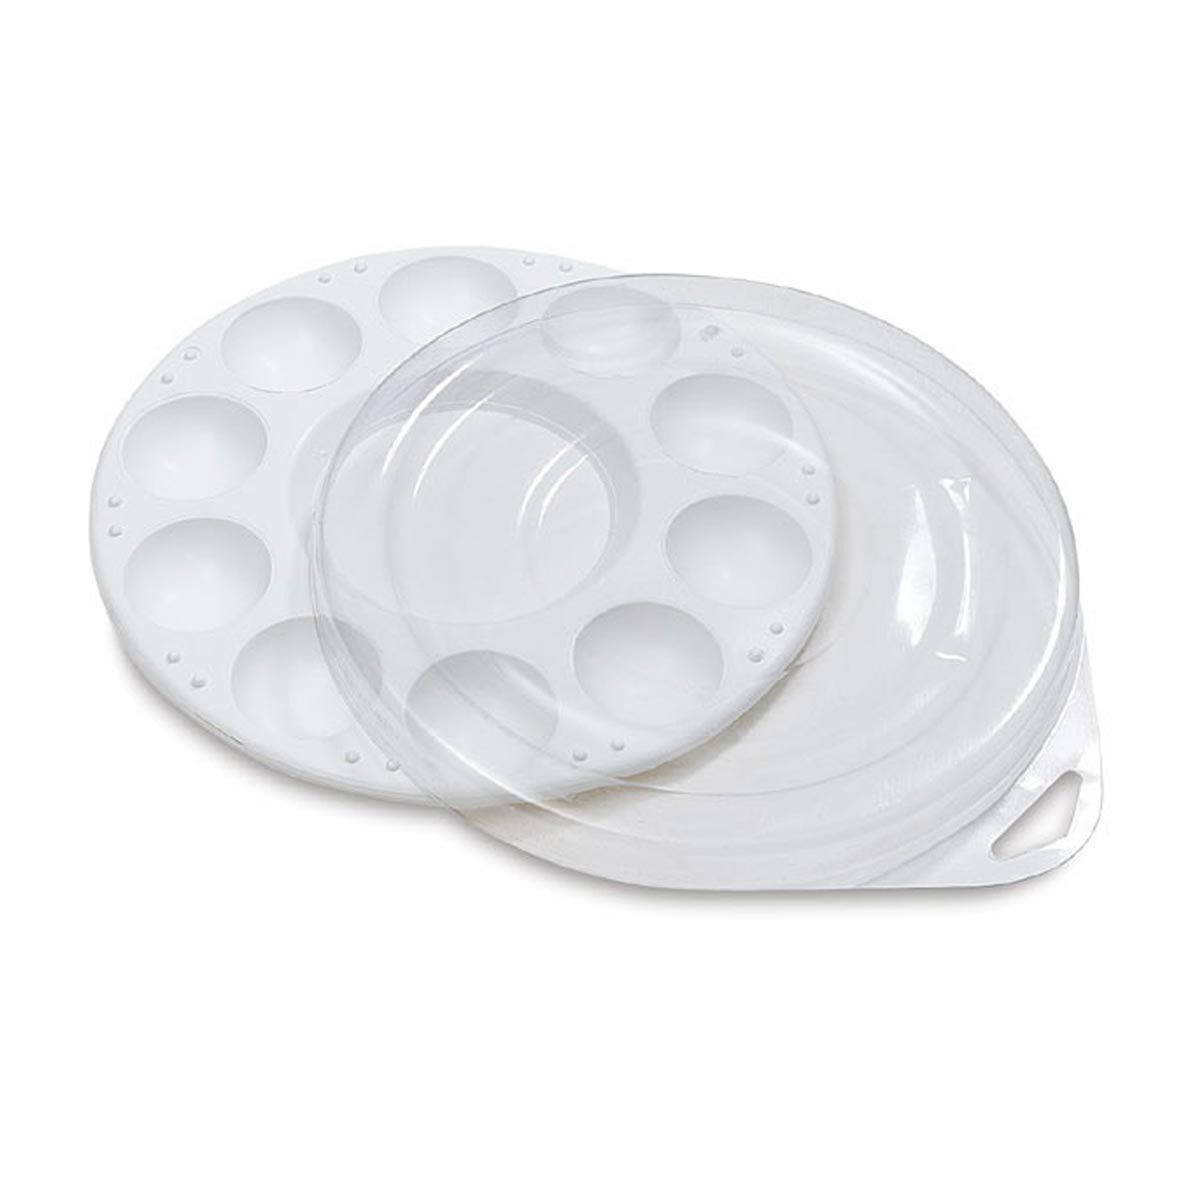 Plastic Watercolour Palette Round With Cover - 10 Well Tray